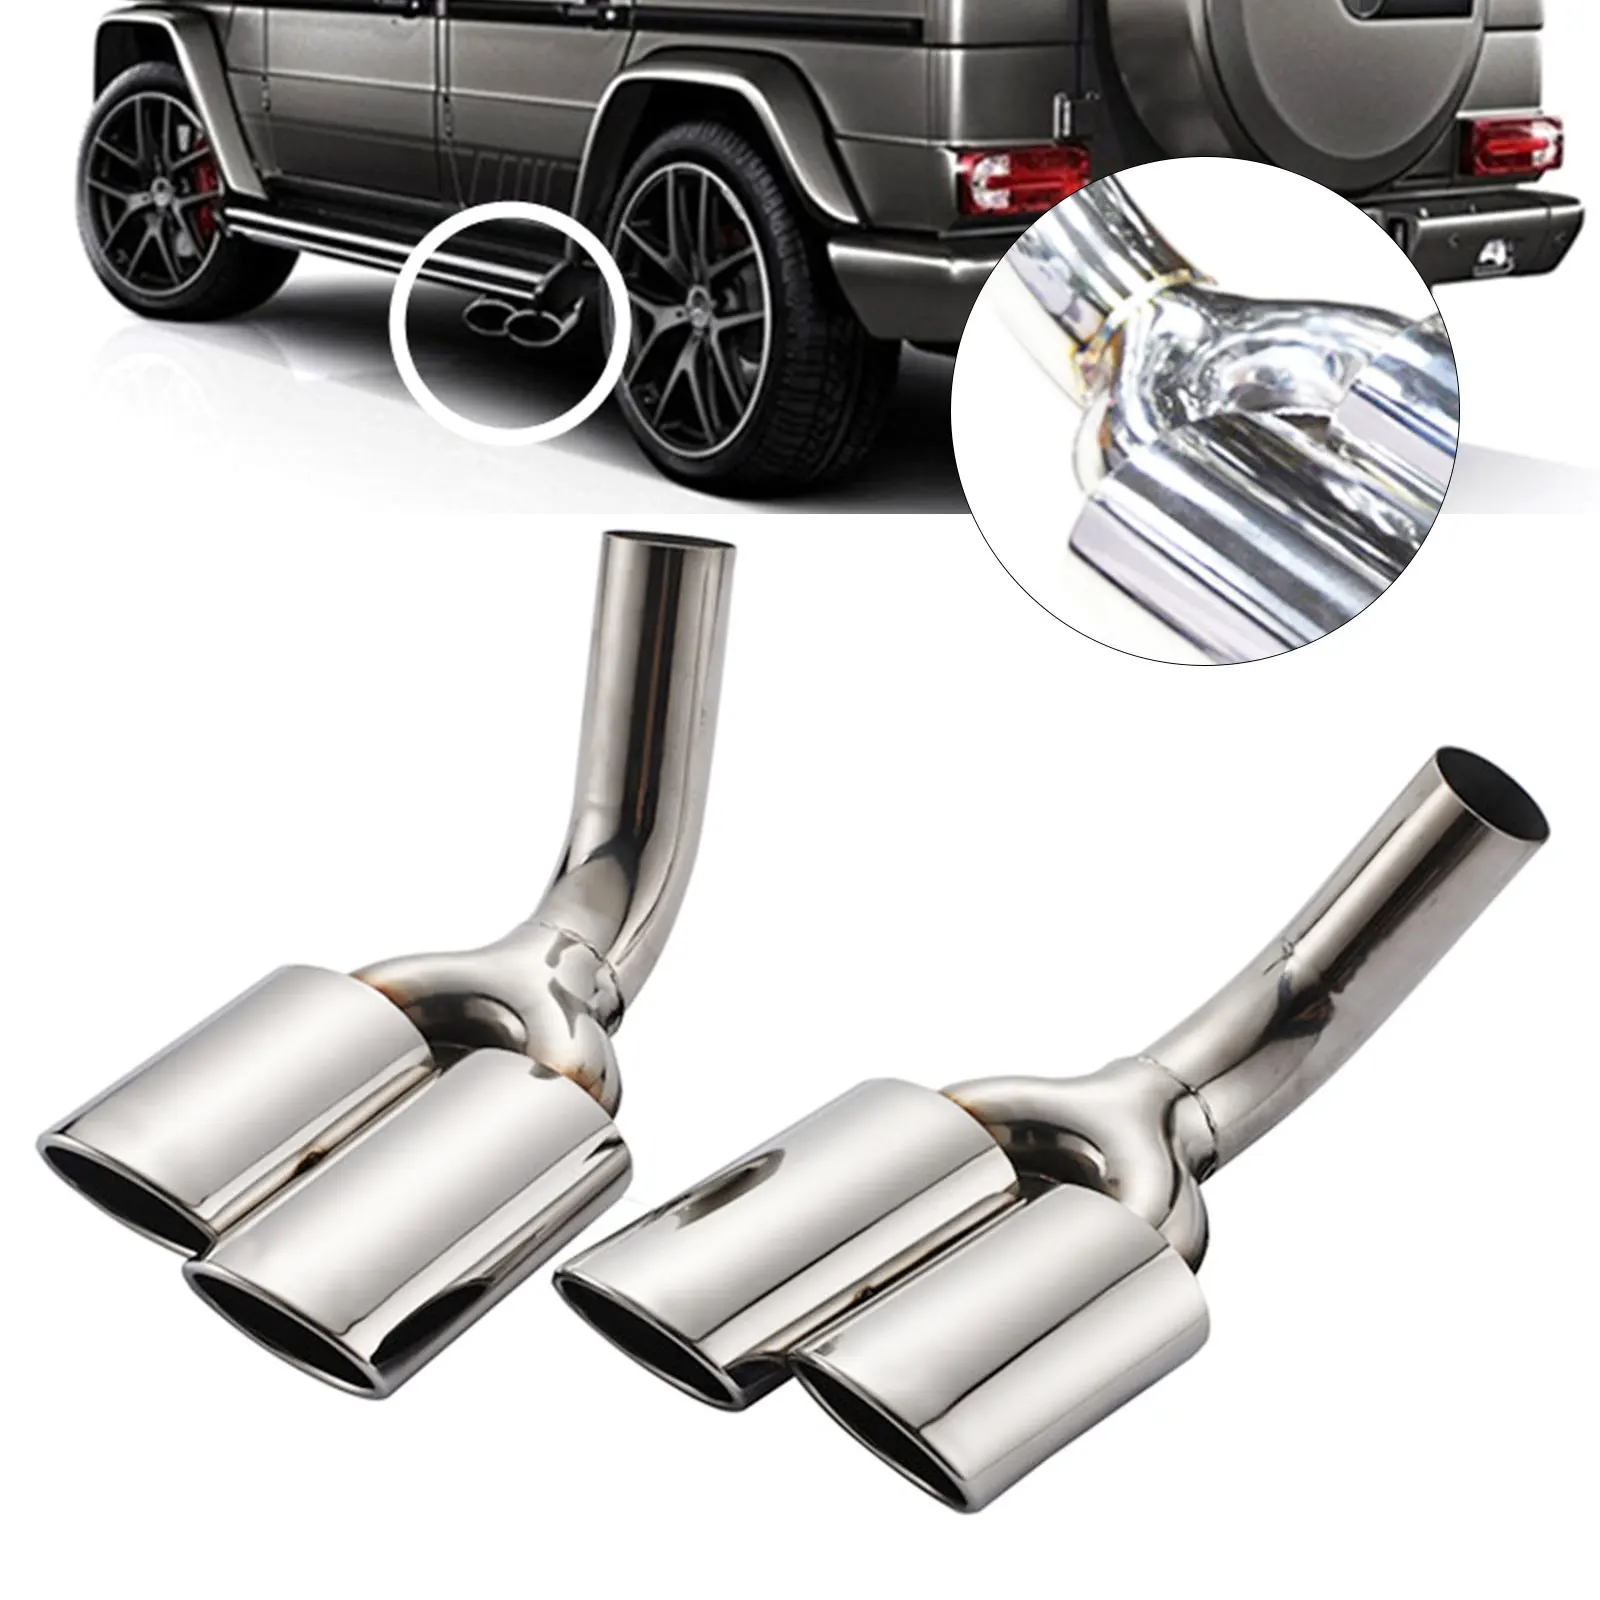 

Silver Stainless Steel DUAL Exhaust Muffler End Tip Pipe For Mercedes-Benz G W463 G500 G55 G63 Sport